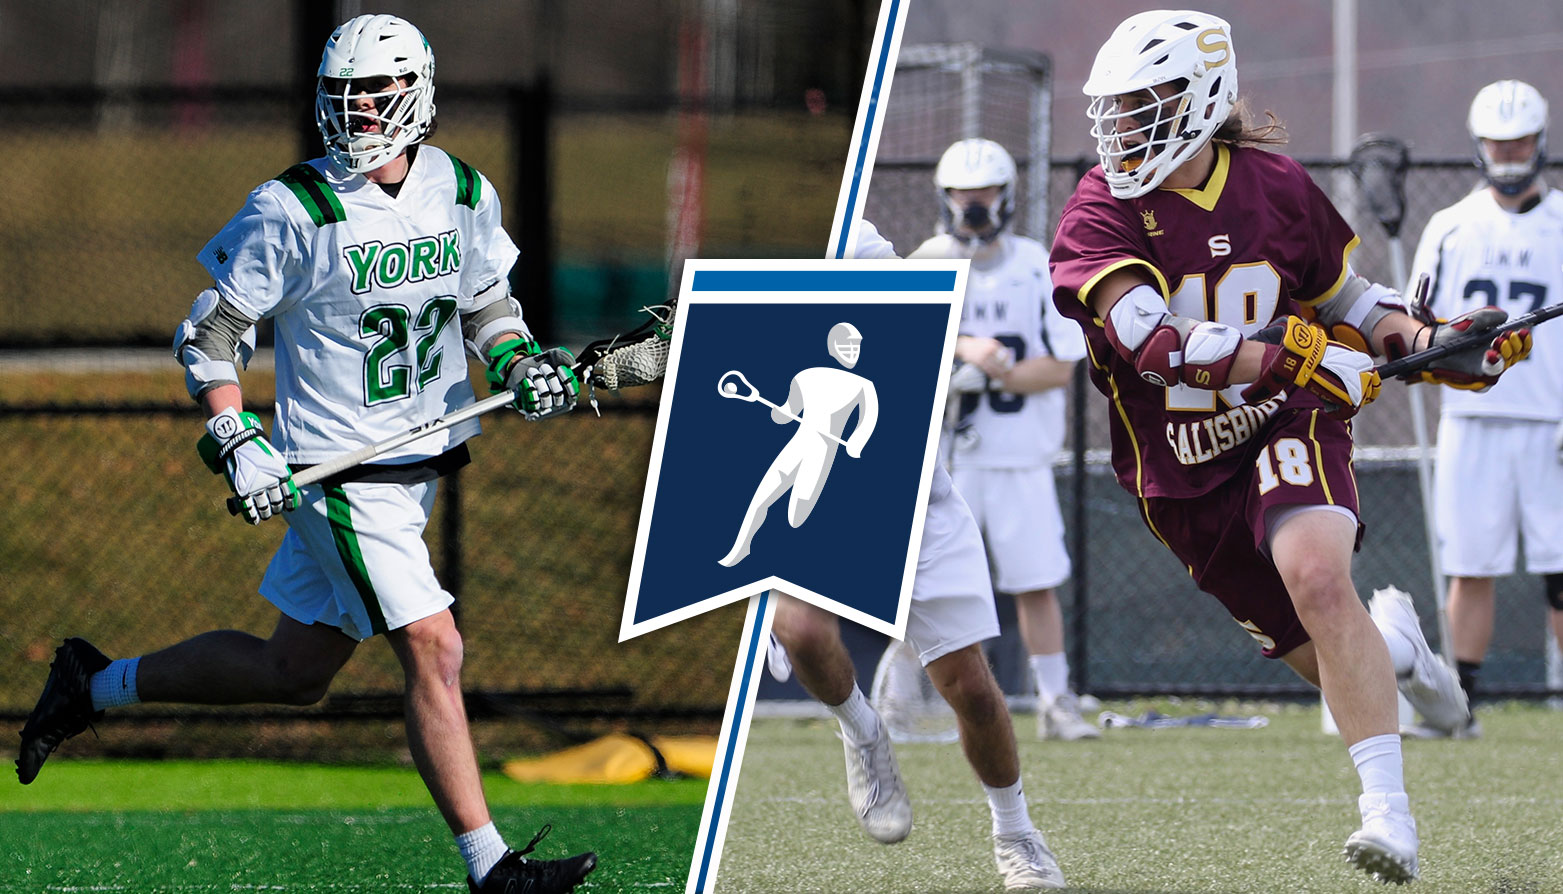 Salisbury & York Victorious in NCAA Men's Lacrosse Tournament Second Round Matches